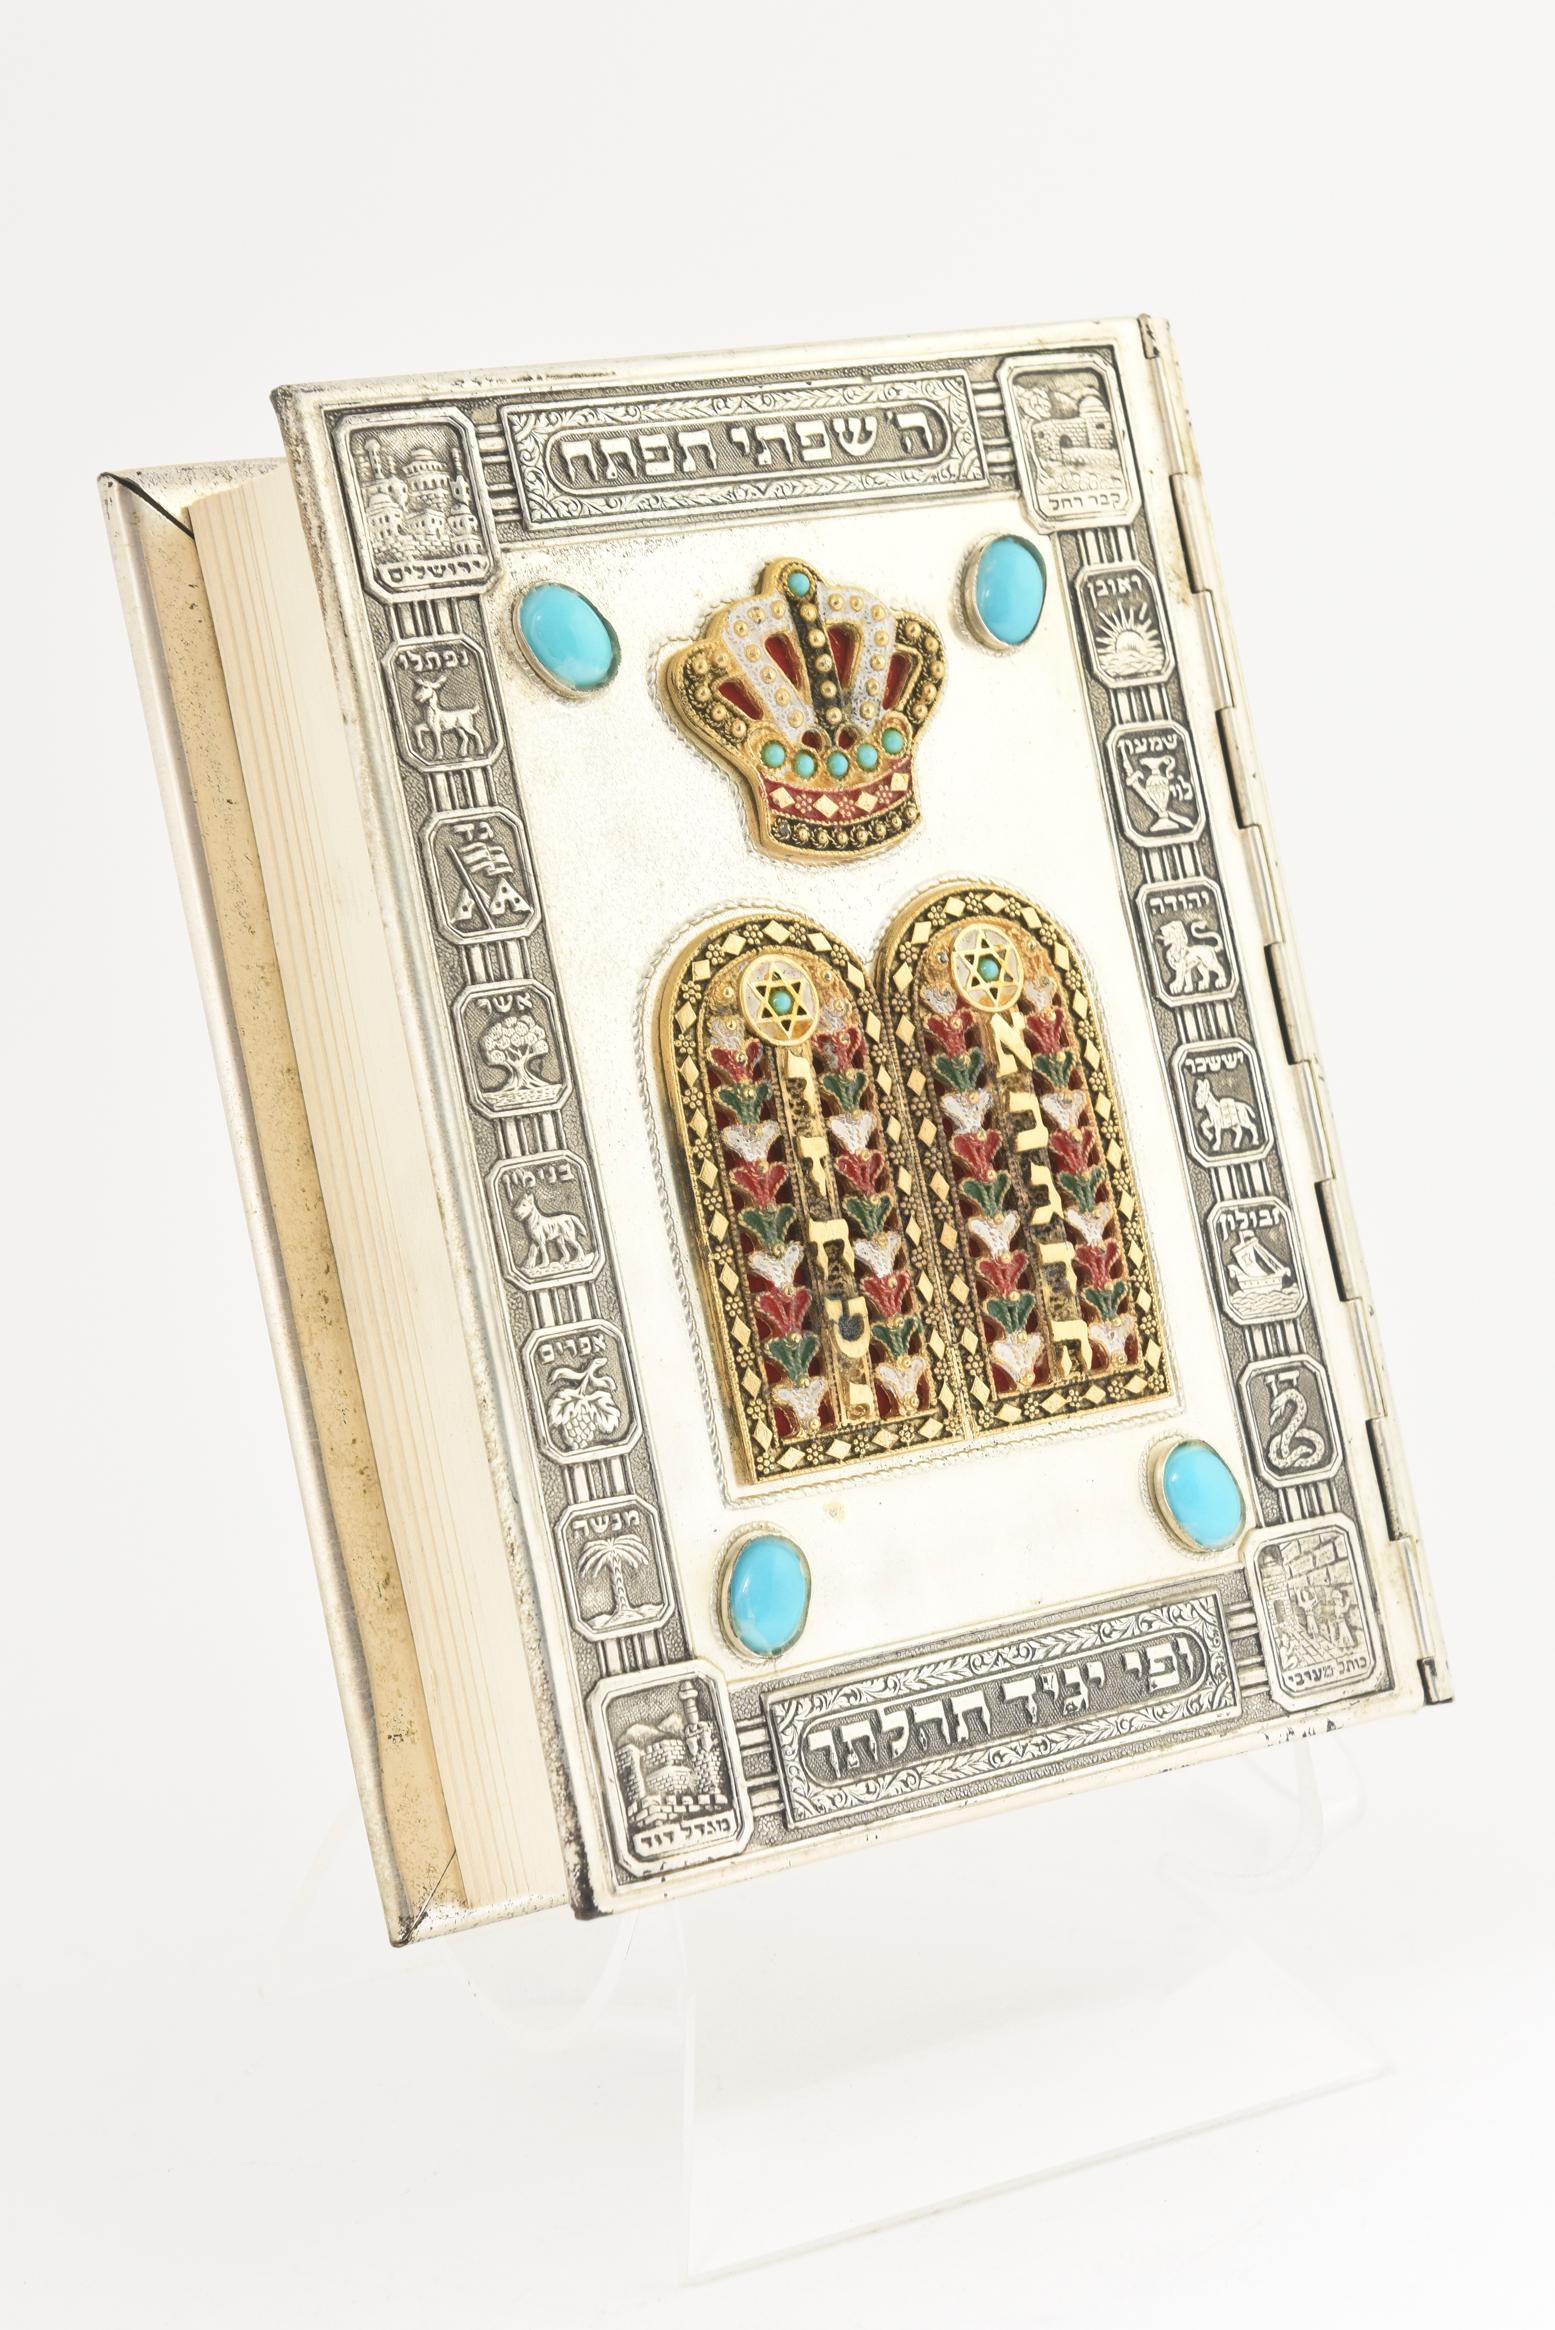 Bezalel style Hebrew Siddur prayer book with English translations and a decorative cover. Israel: Sinai Publishing. The silver plated cover is painted and set with various turquoise-colored stones after the original design by Ze'ev Raban; on the